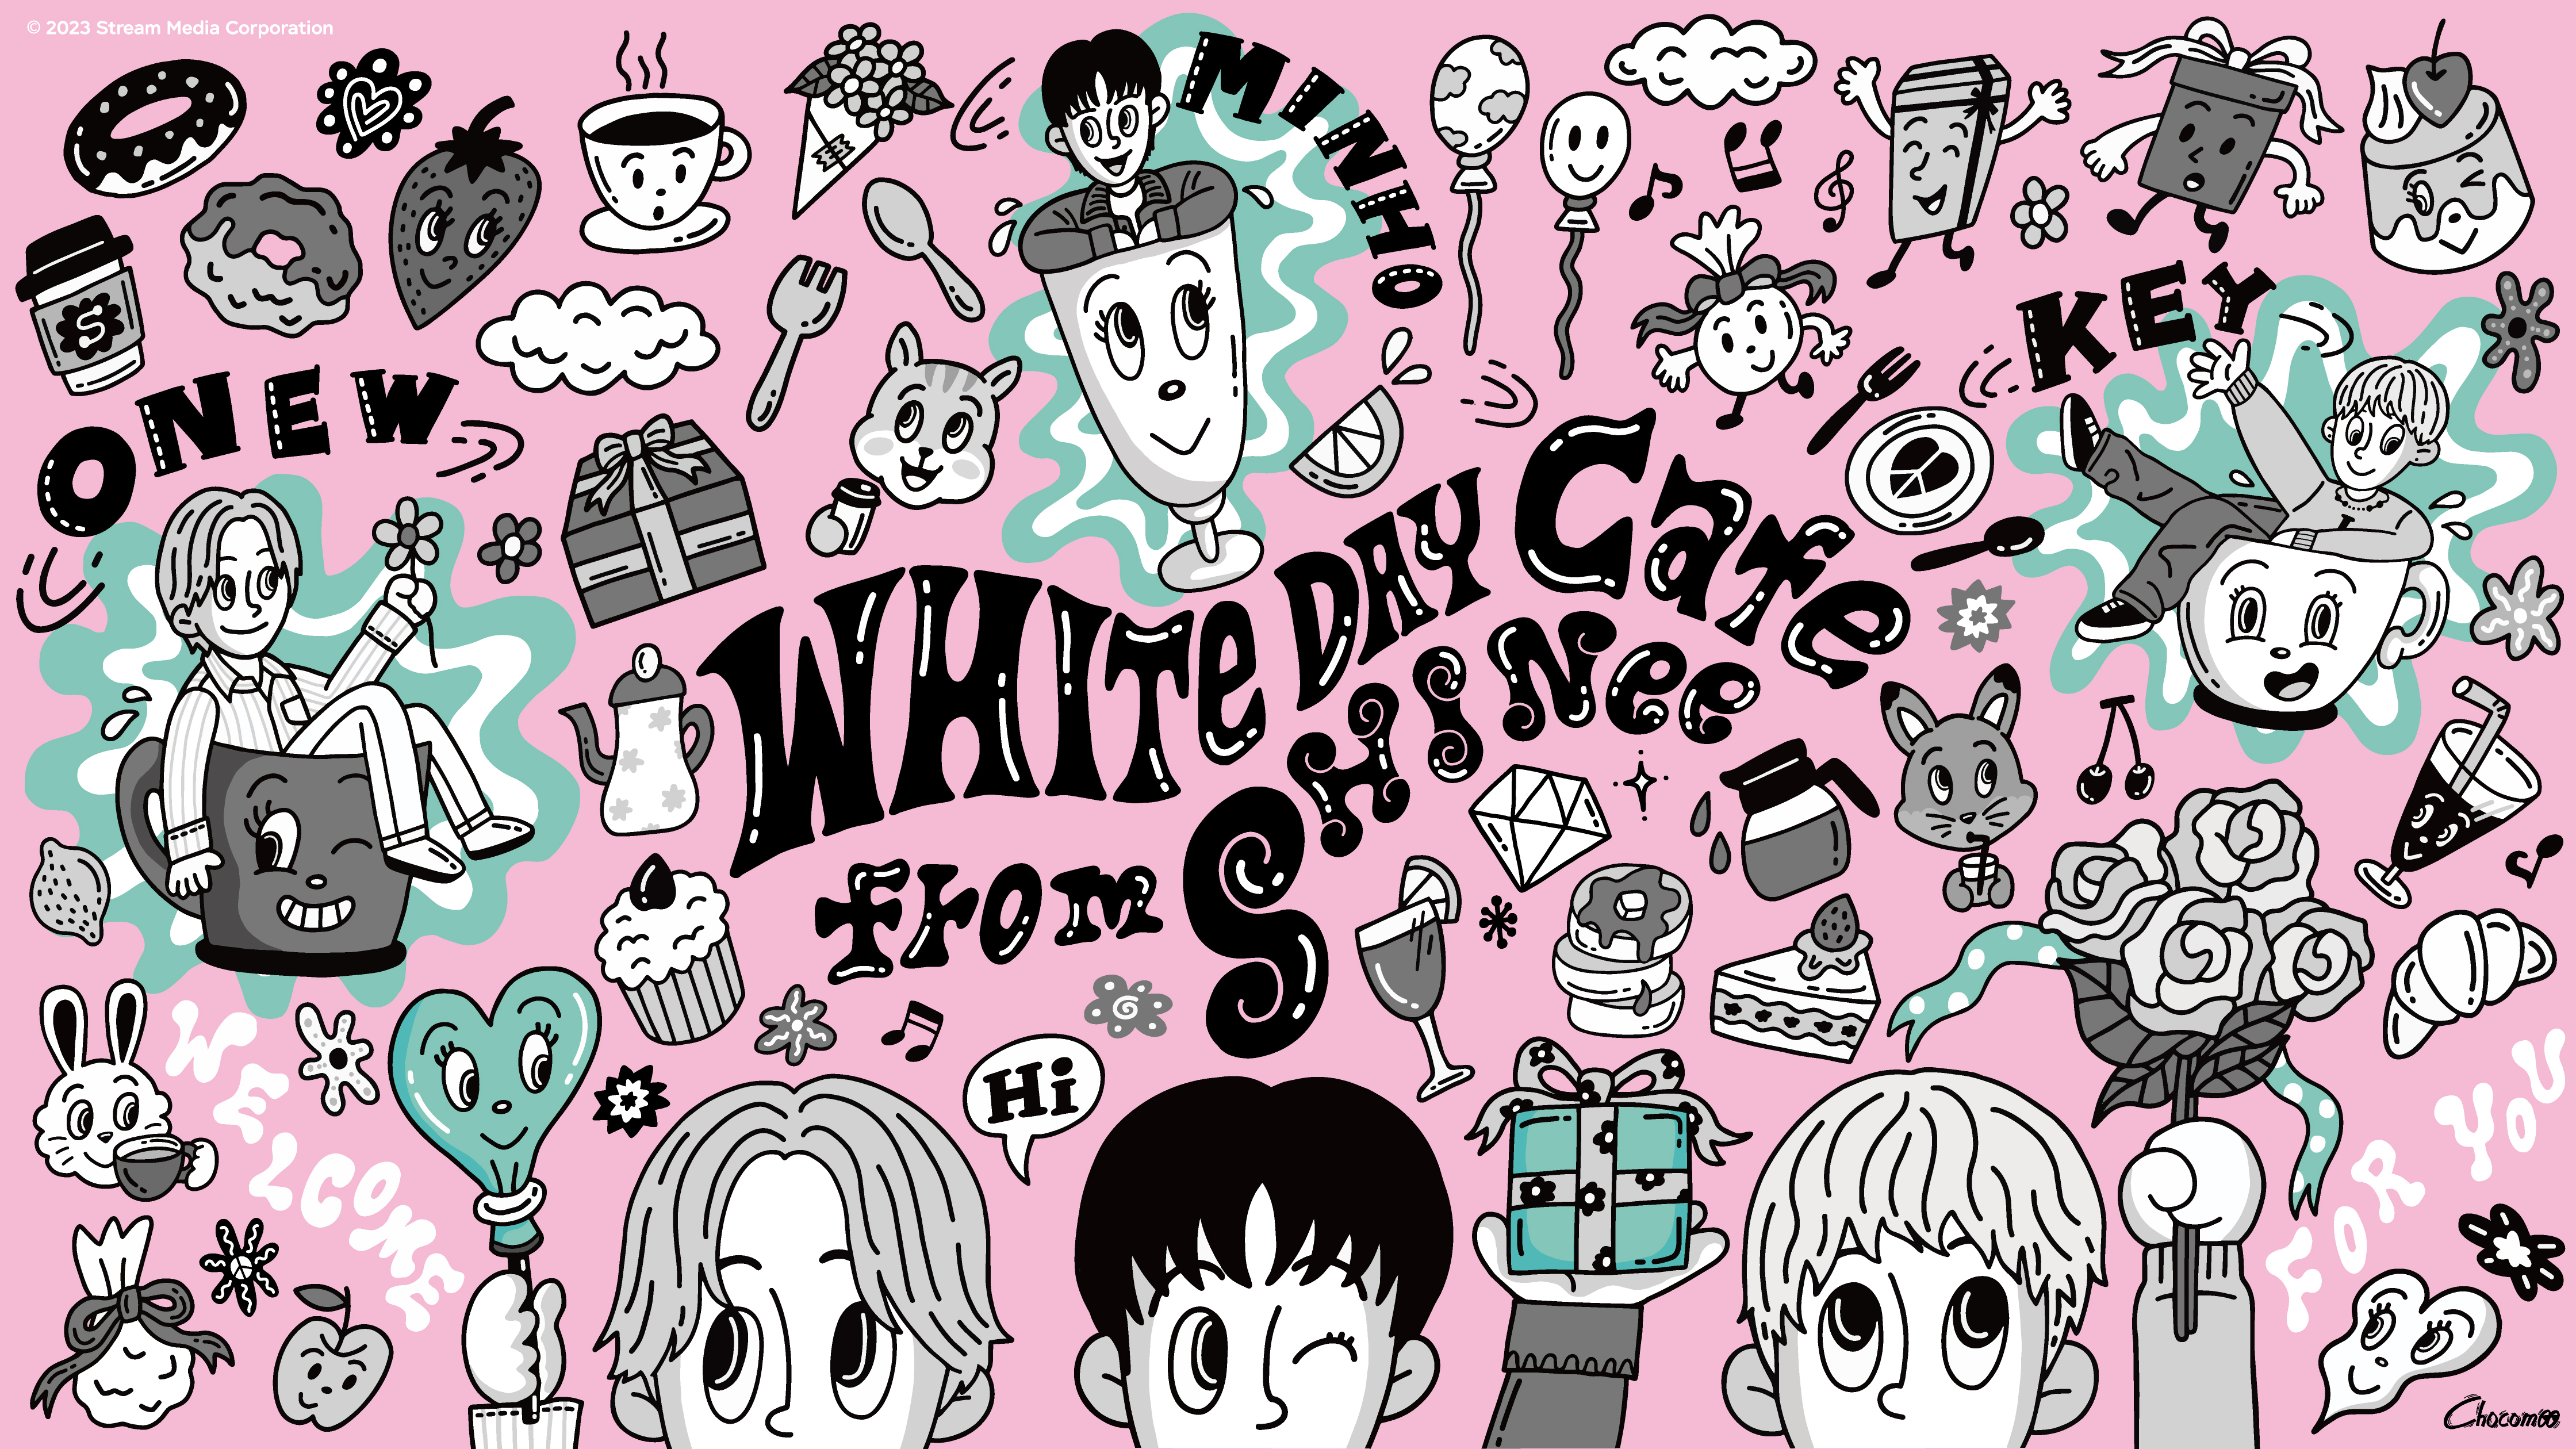 SHINee」のテーマカフェが初開催決定！「WHITE DAY Cafe from SHINee